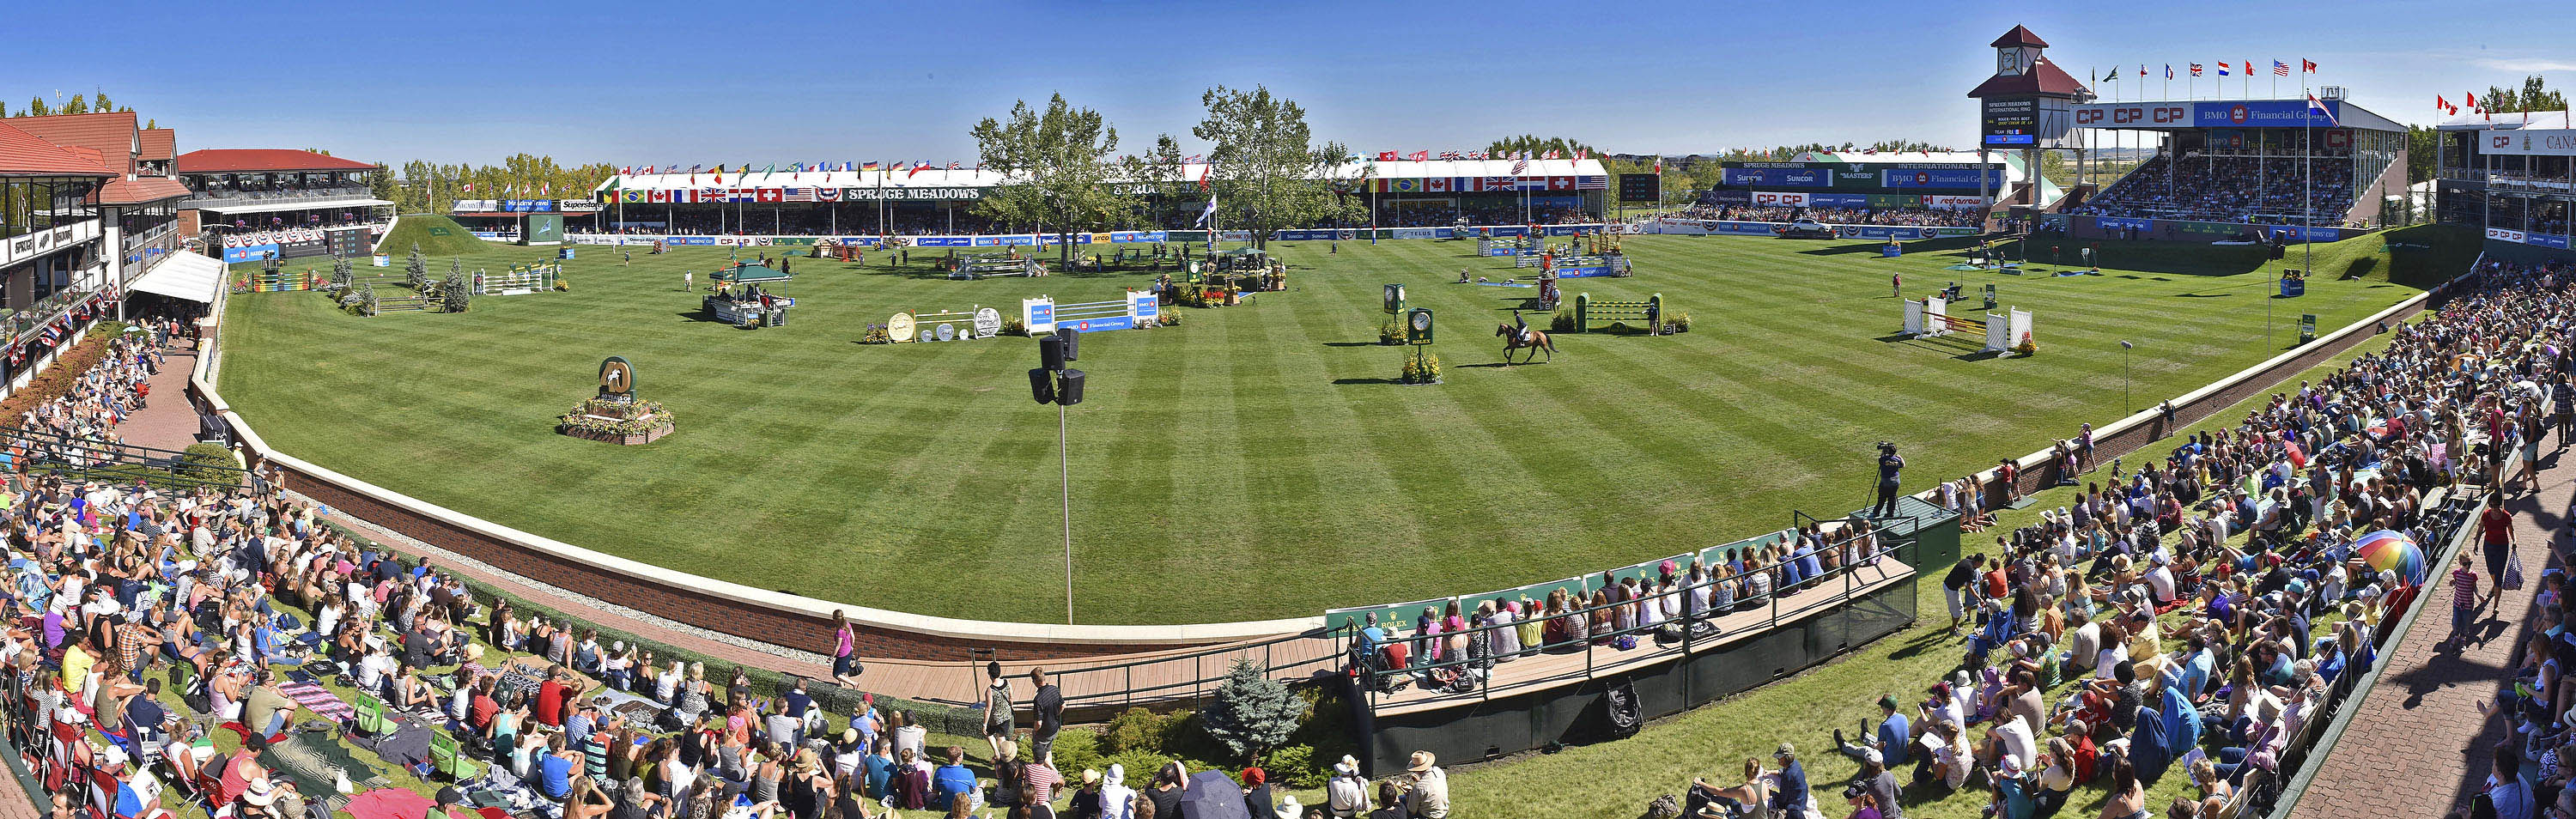 Spruce Meadows 'Masters' 2016 - Rolex 